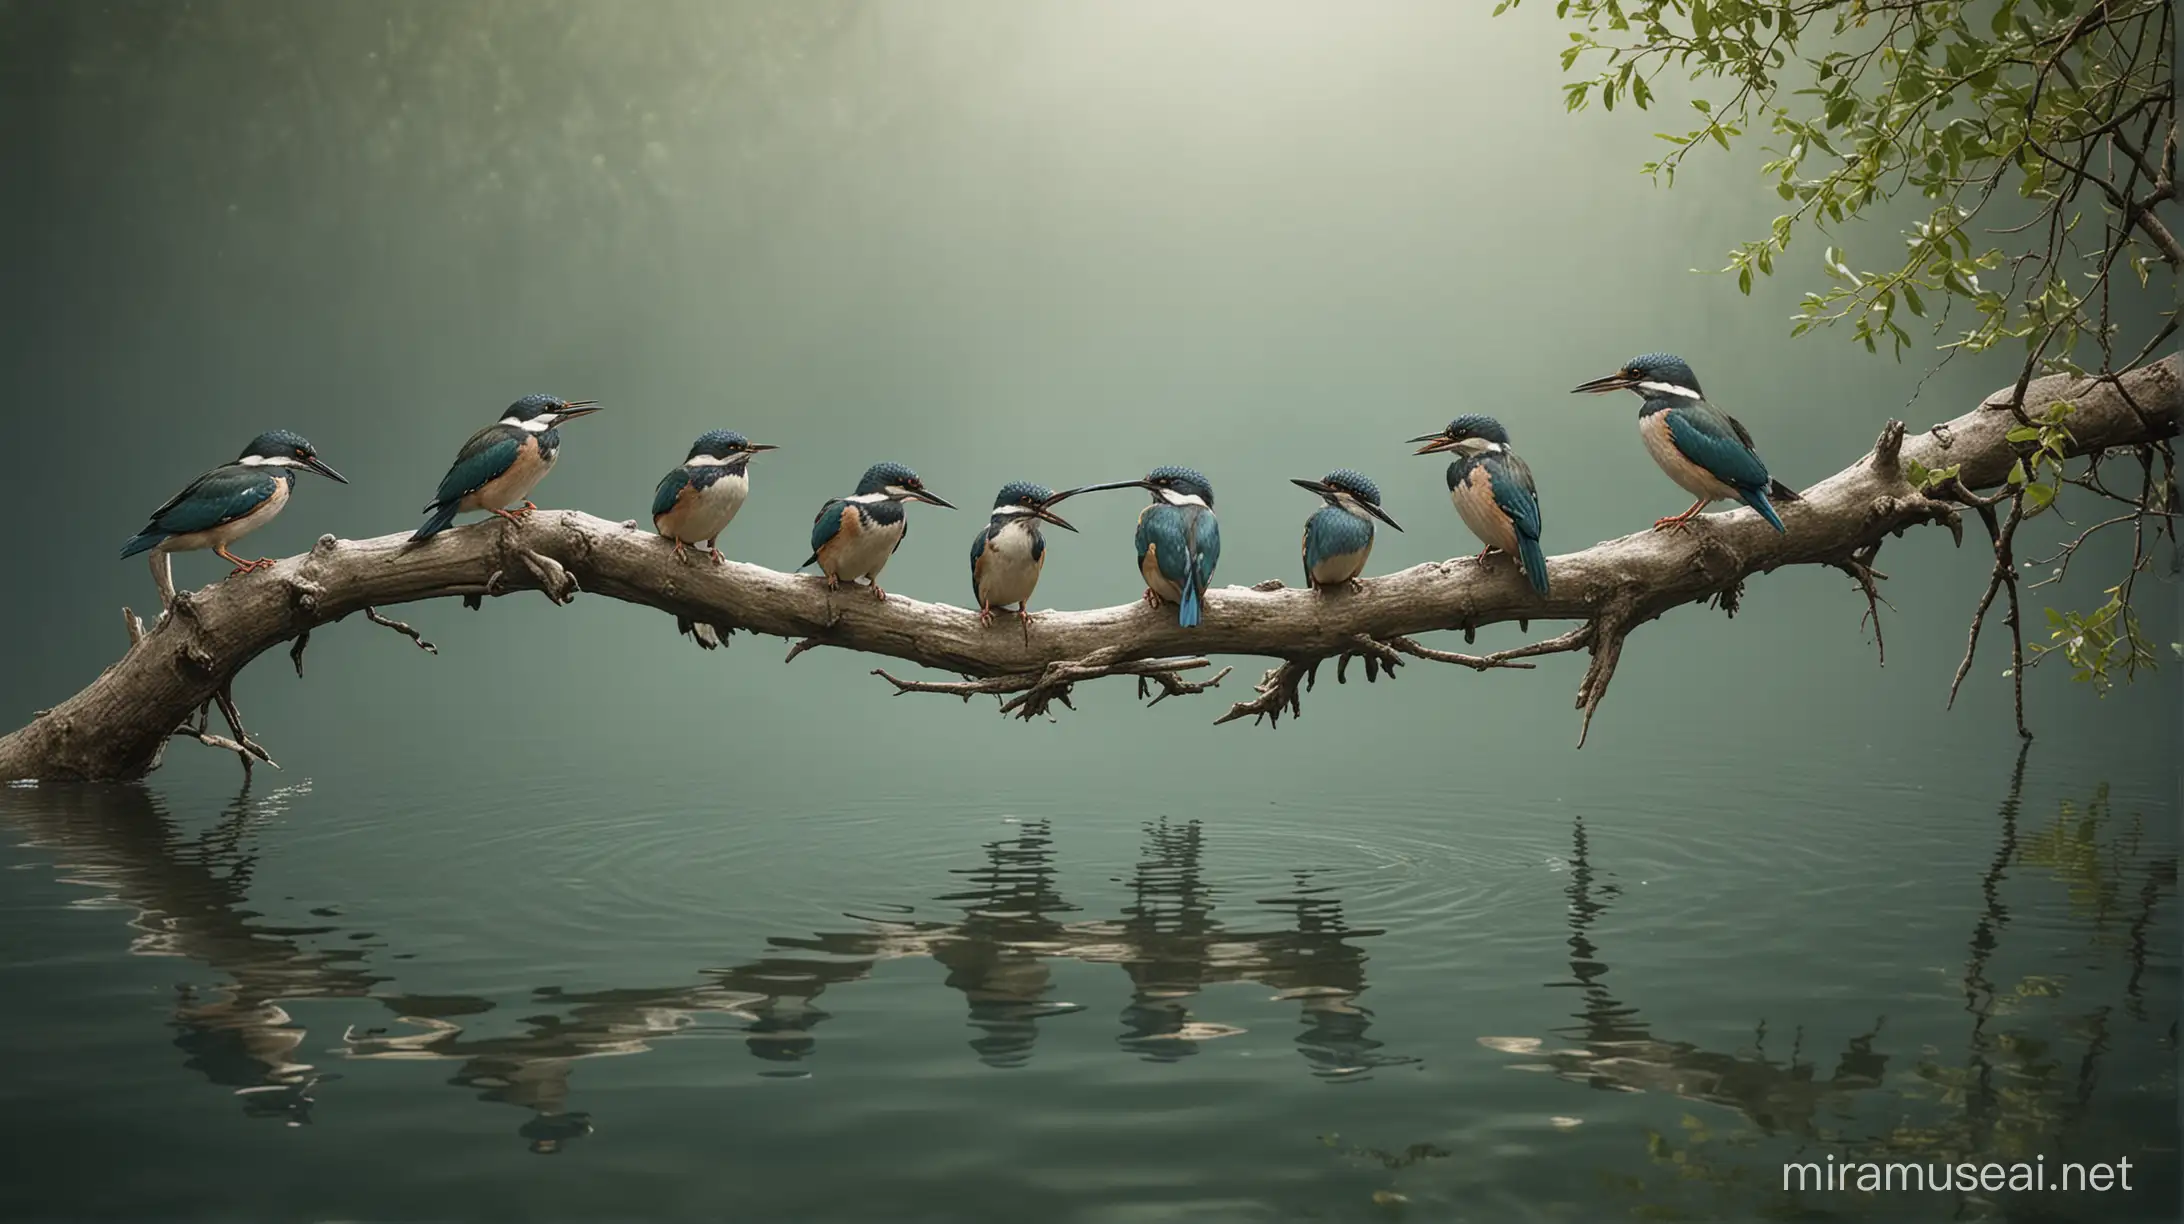 Make a realistic photo of a branche over a water with 3 kingfishers and 1 badger sitting next to each other